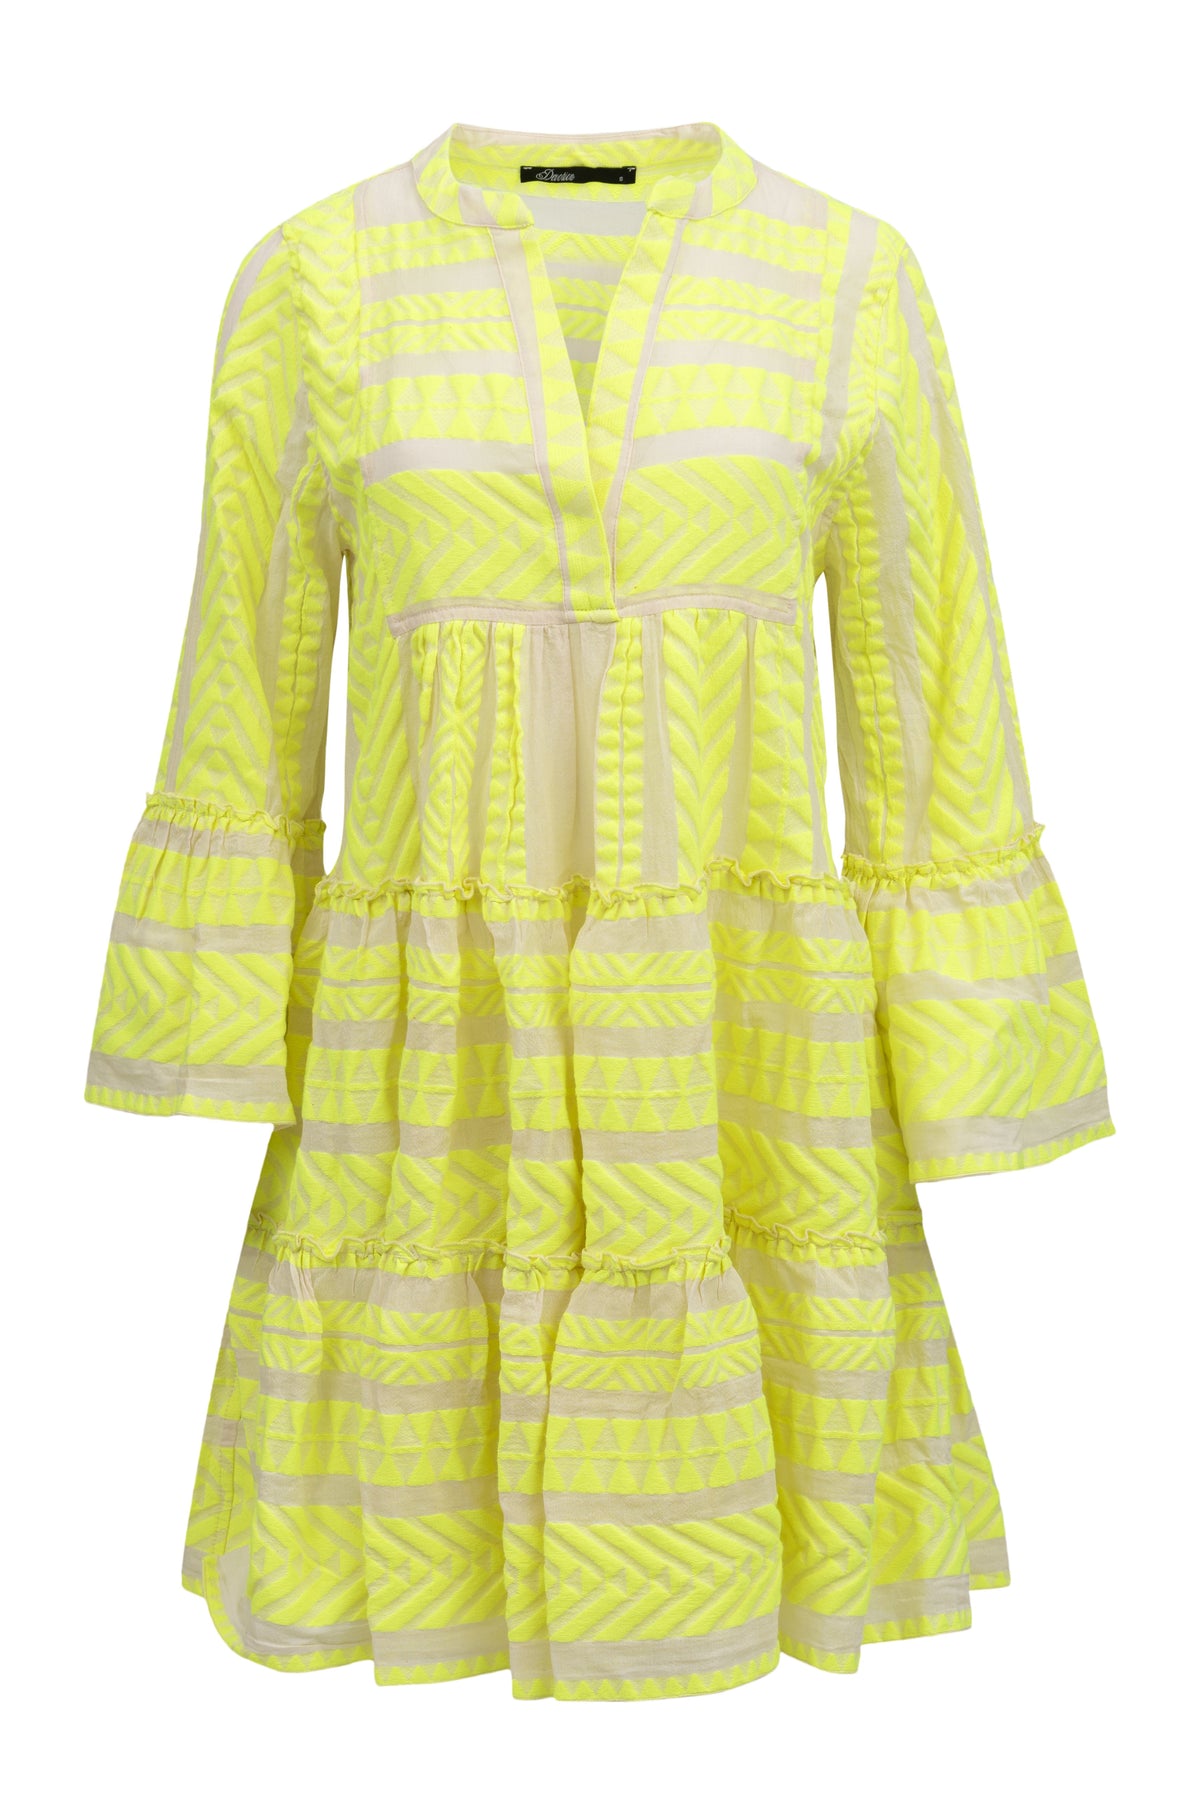 Ecru and neon lime beach dress knee length with tiered skirt notch neck and flared long sleeves